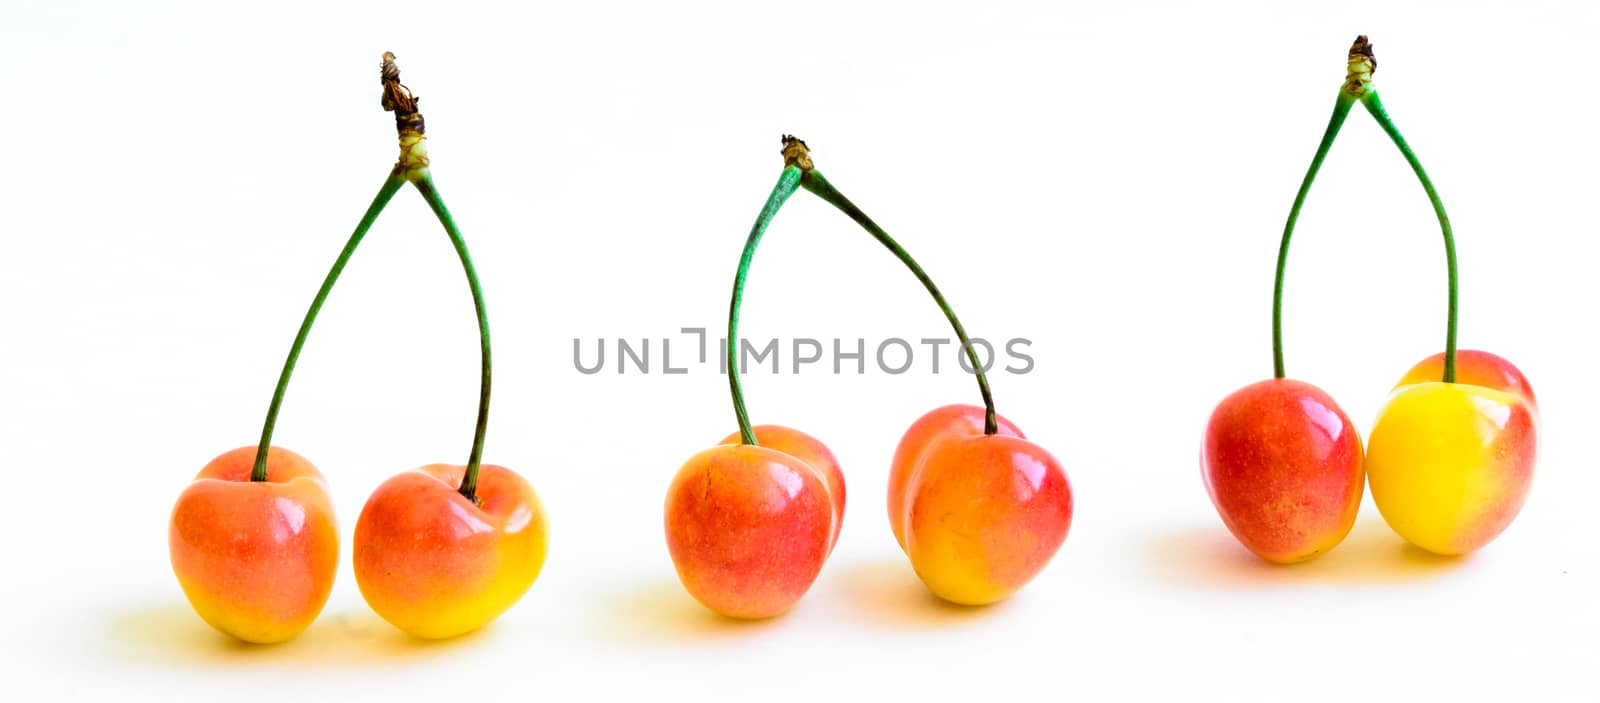 Studio shot group of Rainier cherries in a row with long stems isolated on white by trongnguyen